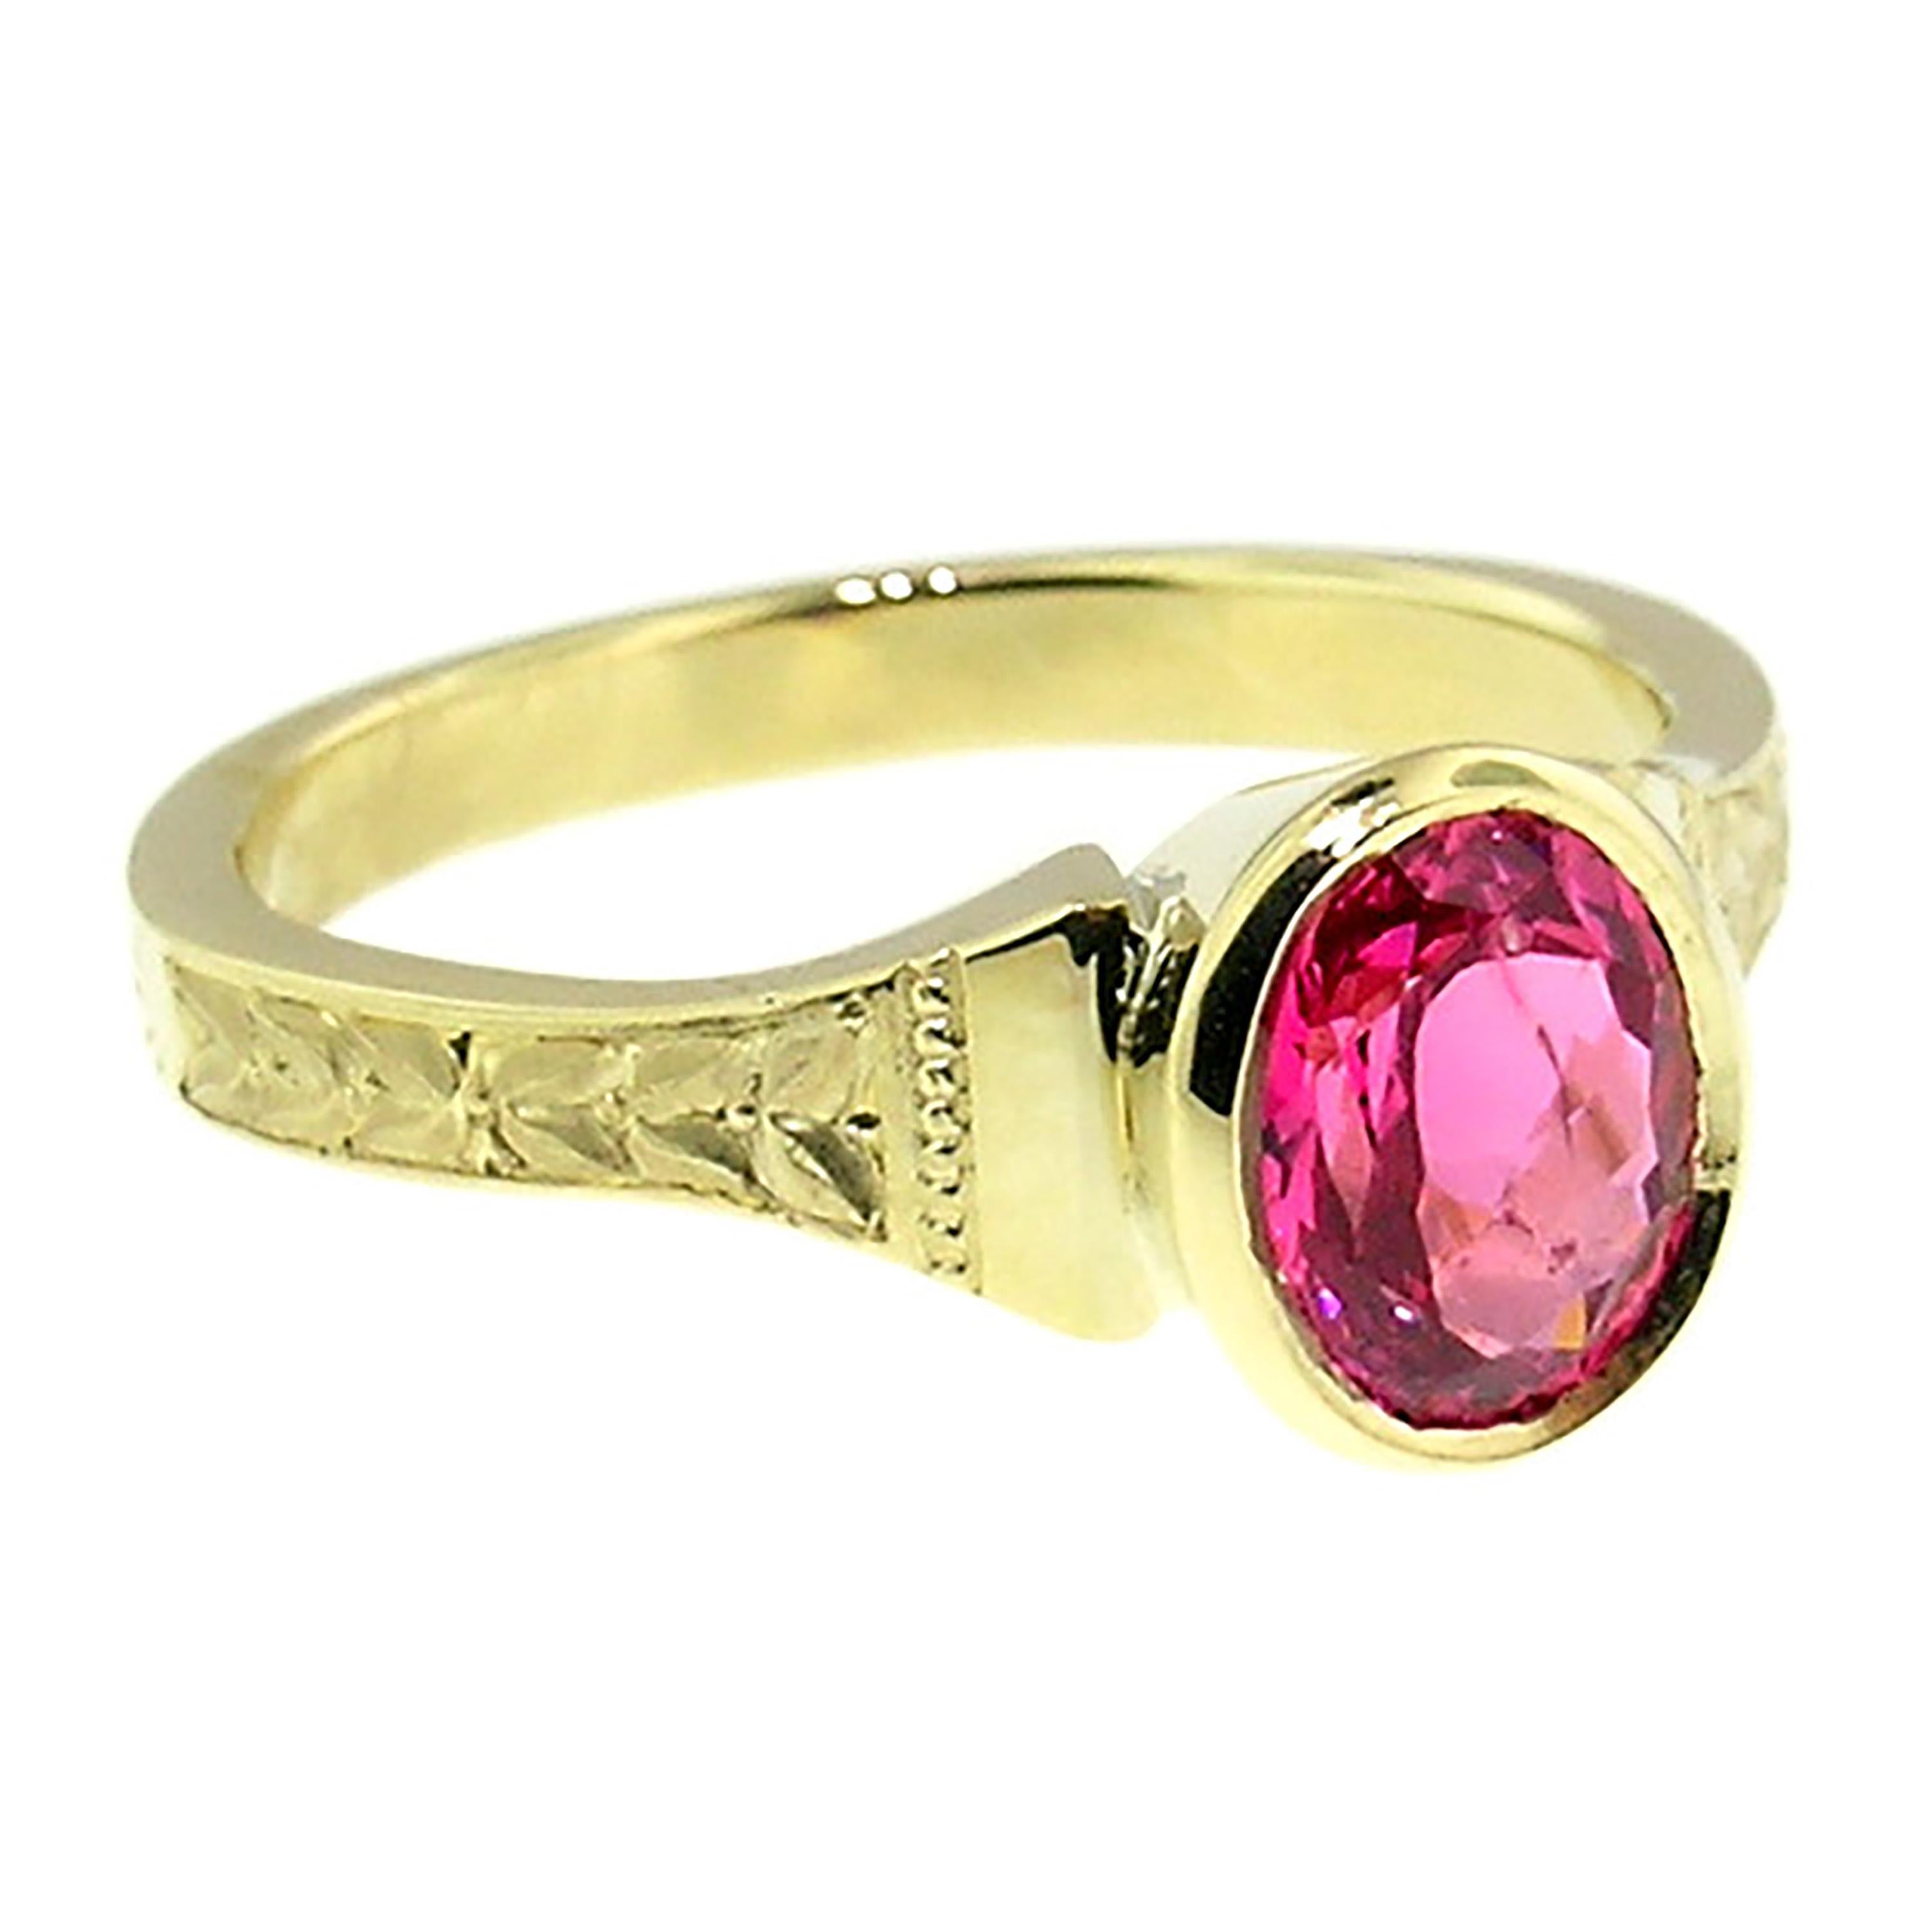 Oval Cut Cynthia Scott 1.20ct Mahenge Spinel in 18kt Gold Cassandra Ring